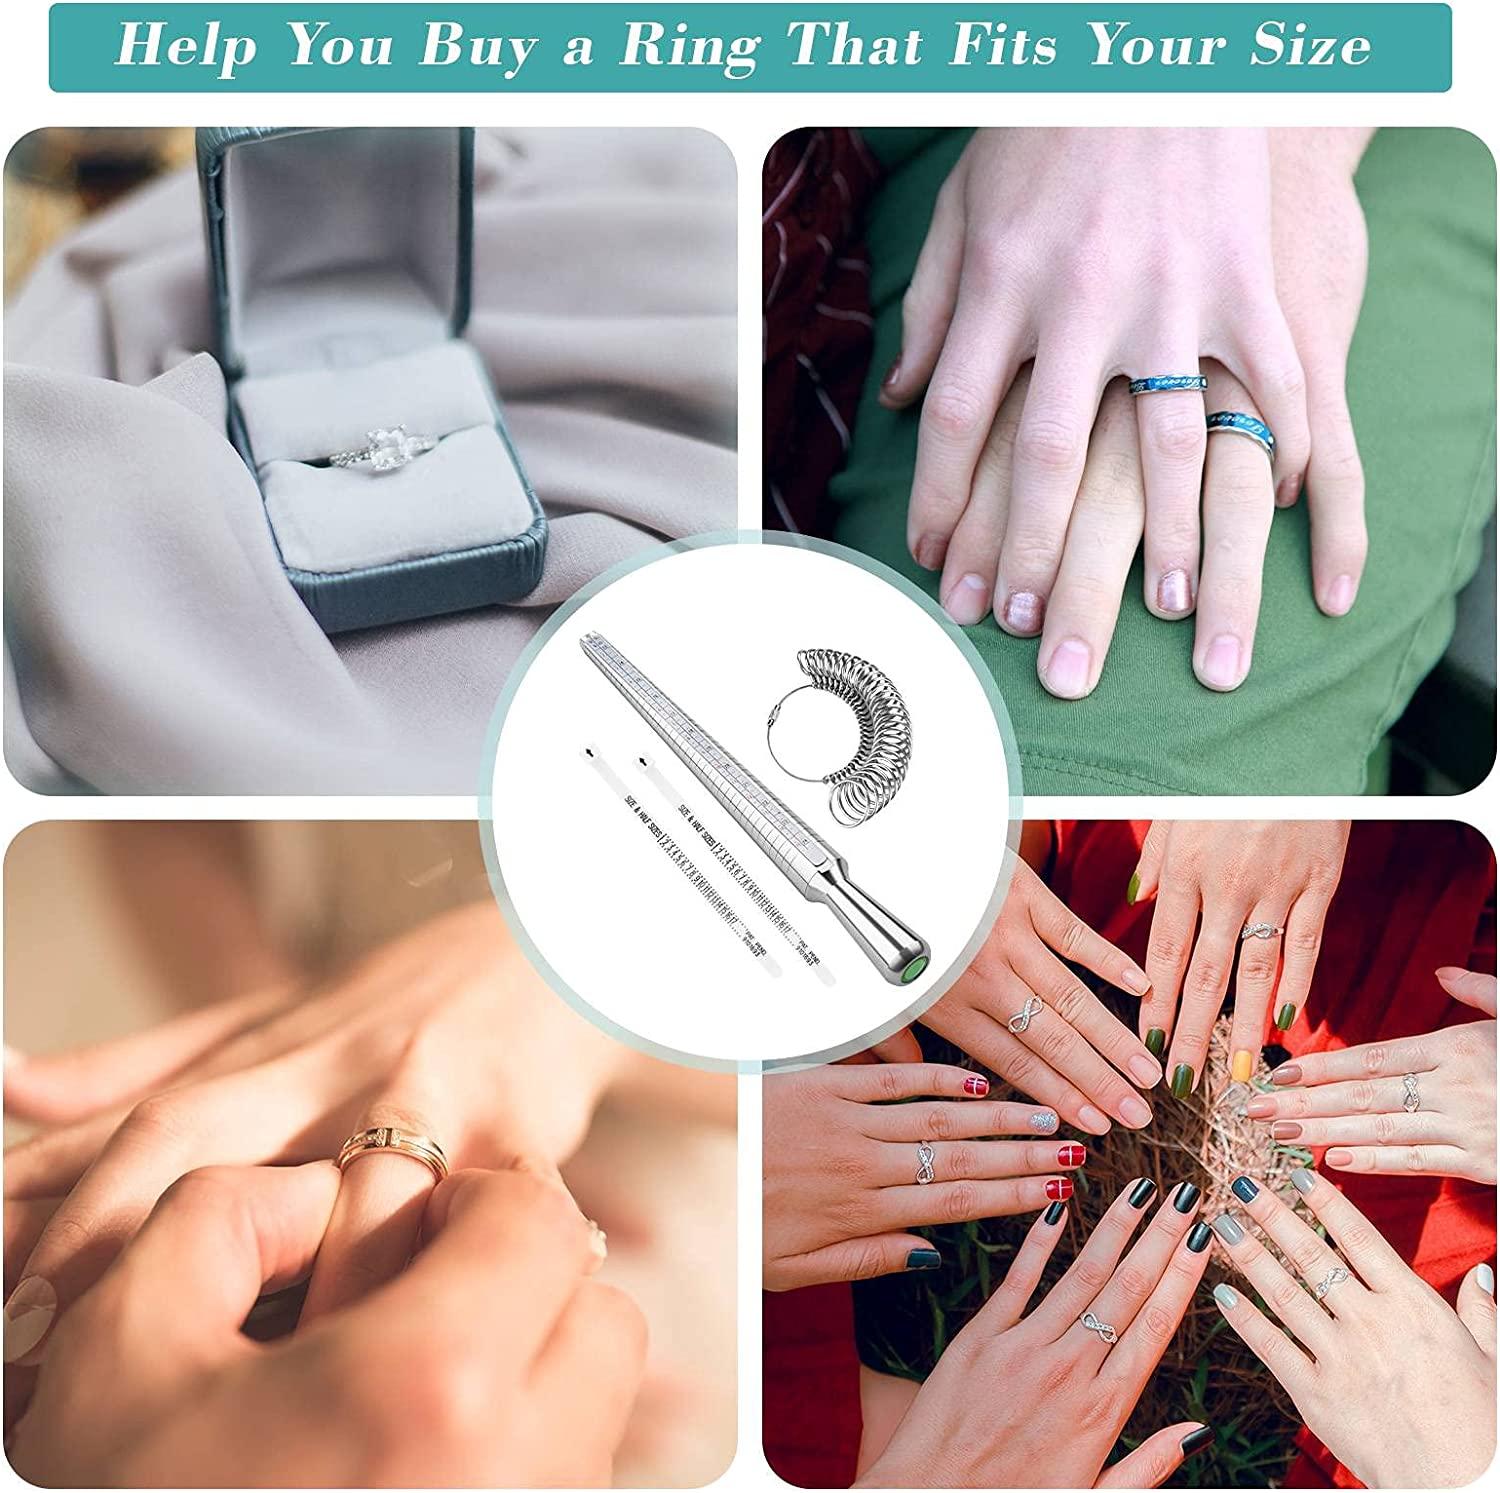 Inner Plane Ring Sizer Measuring Tool Ring Measurement Tool for Perfect Finger Size Rings. Ring Sizers Measuring Tape Ring Jewelry Making Kit Finger Sizing